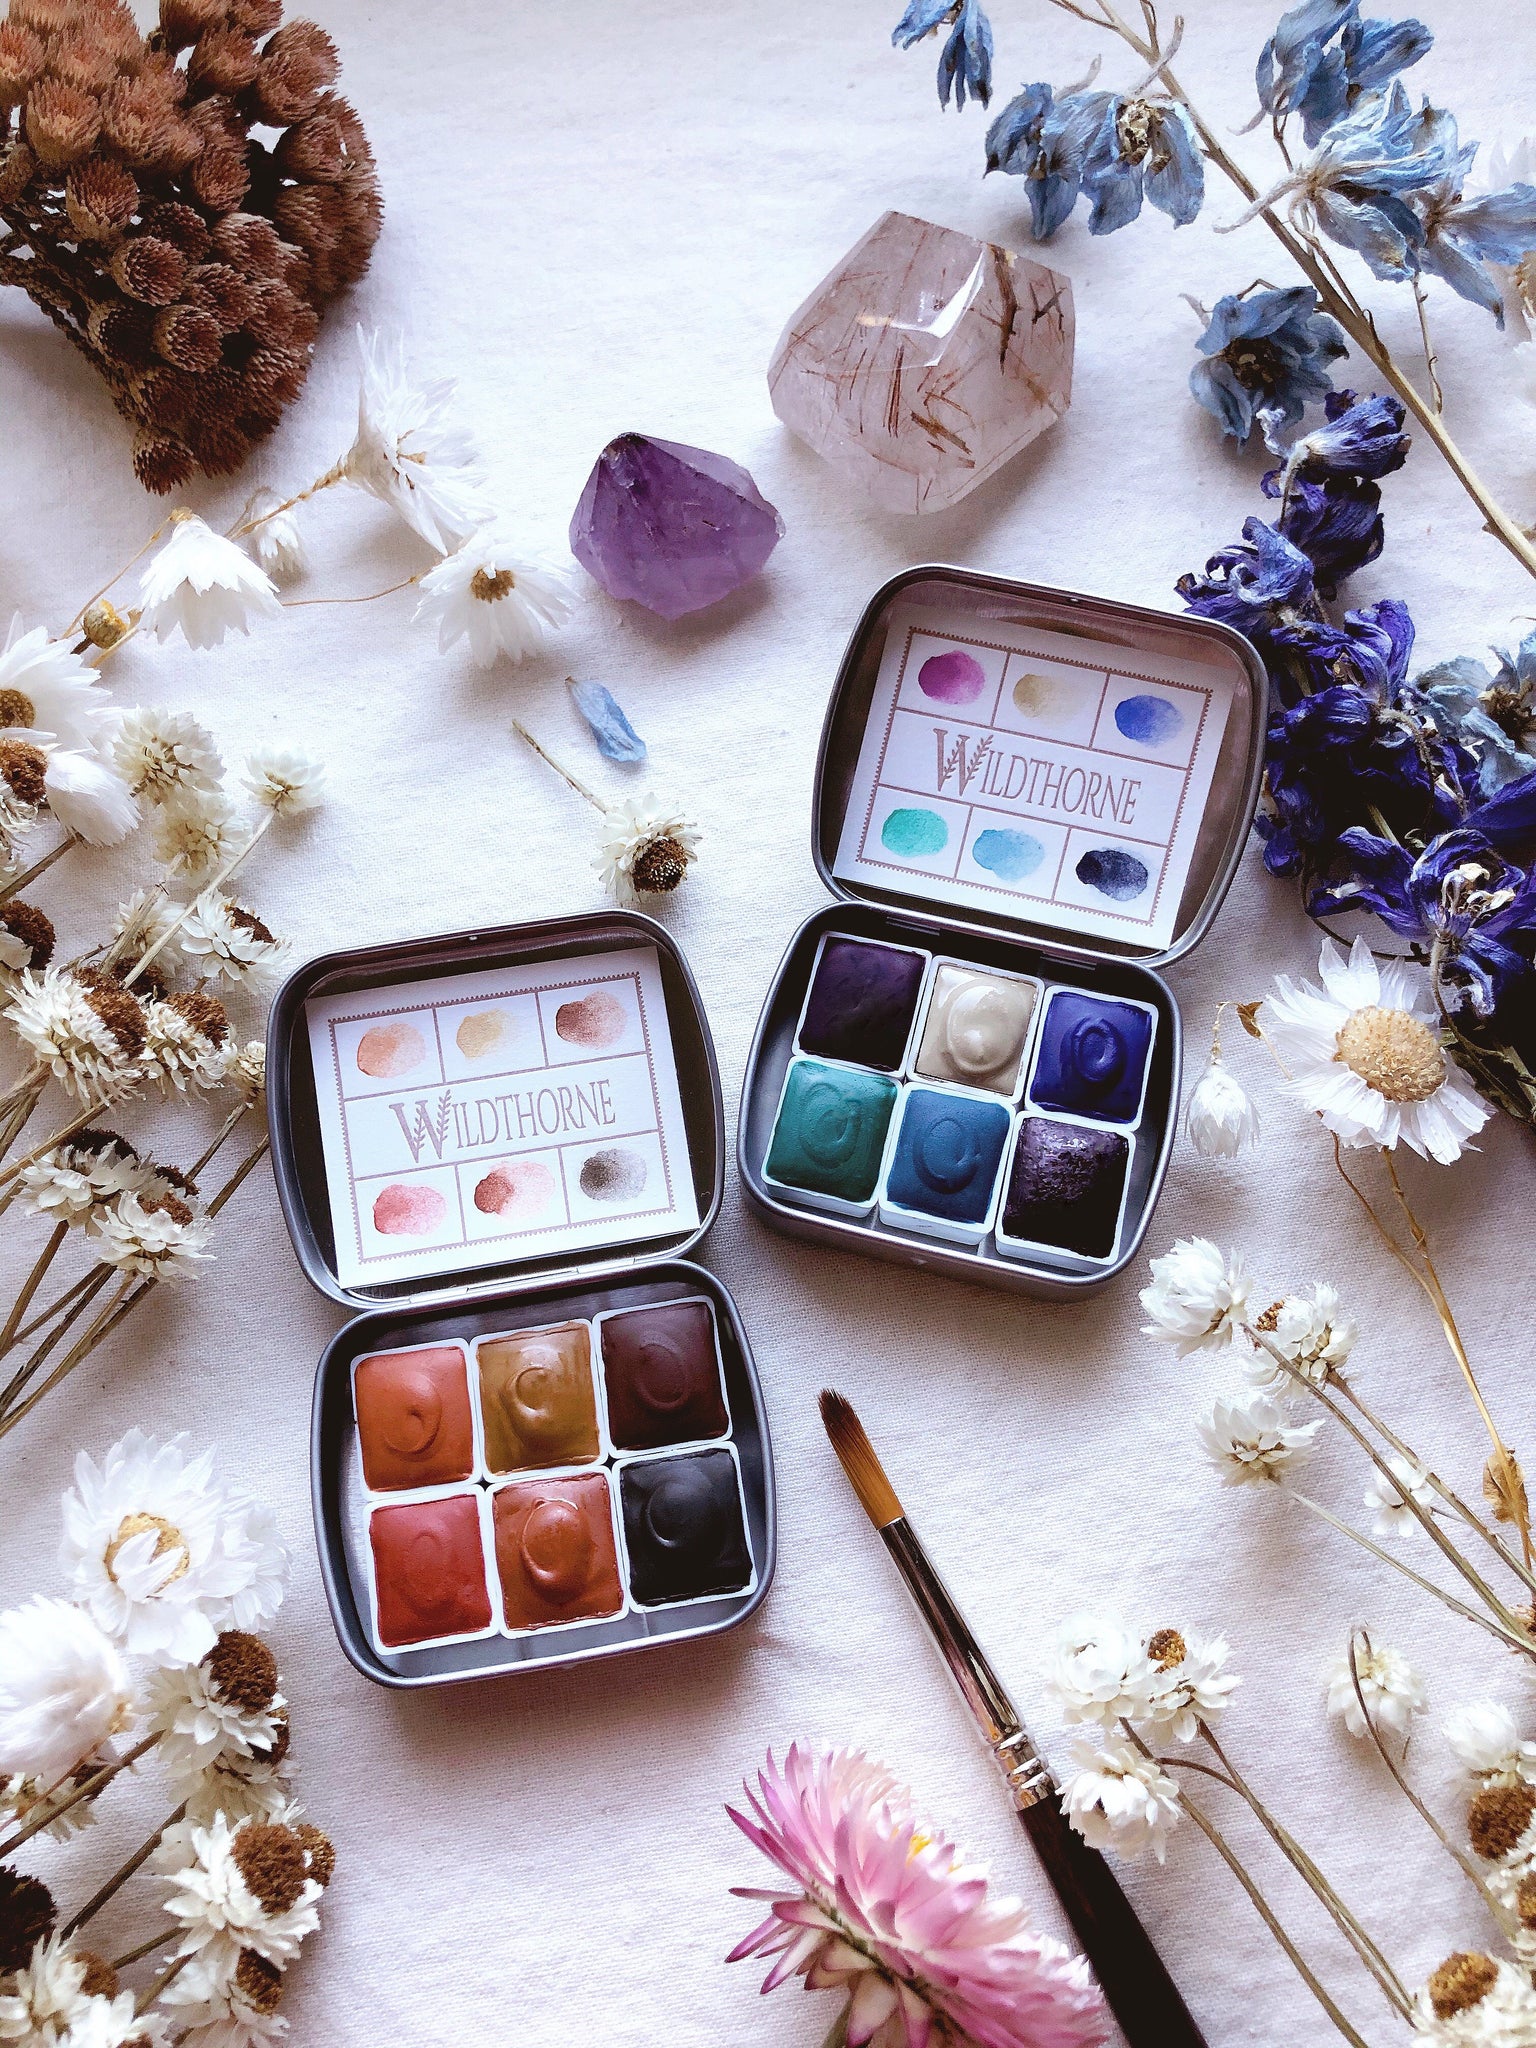 RESERVE for Zane + Desert Medicine - “Being You” - Limited edition Mineral watercolor palette